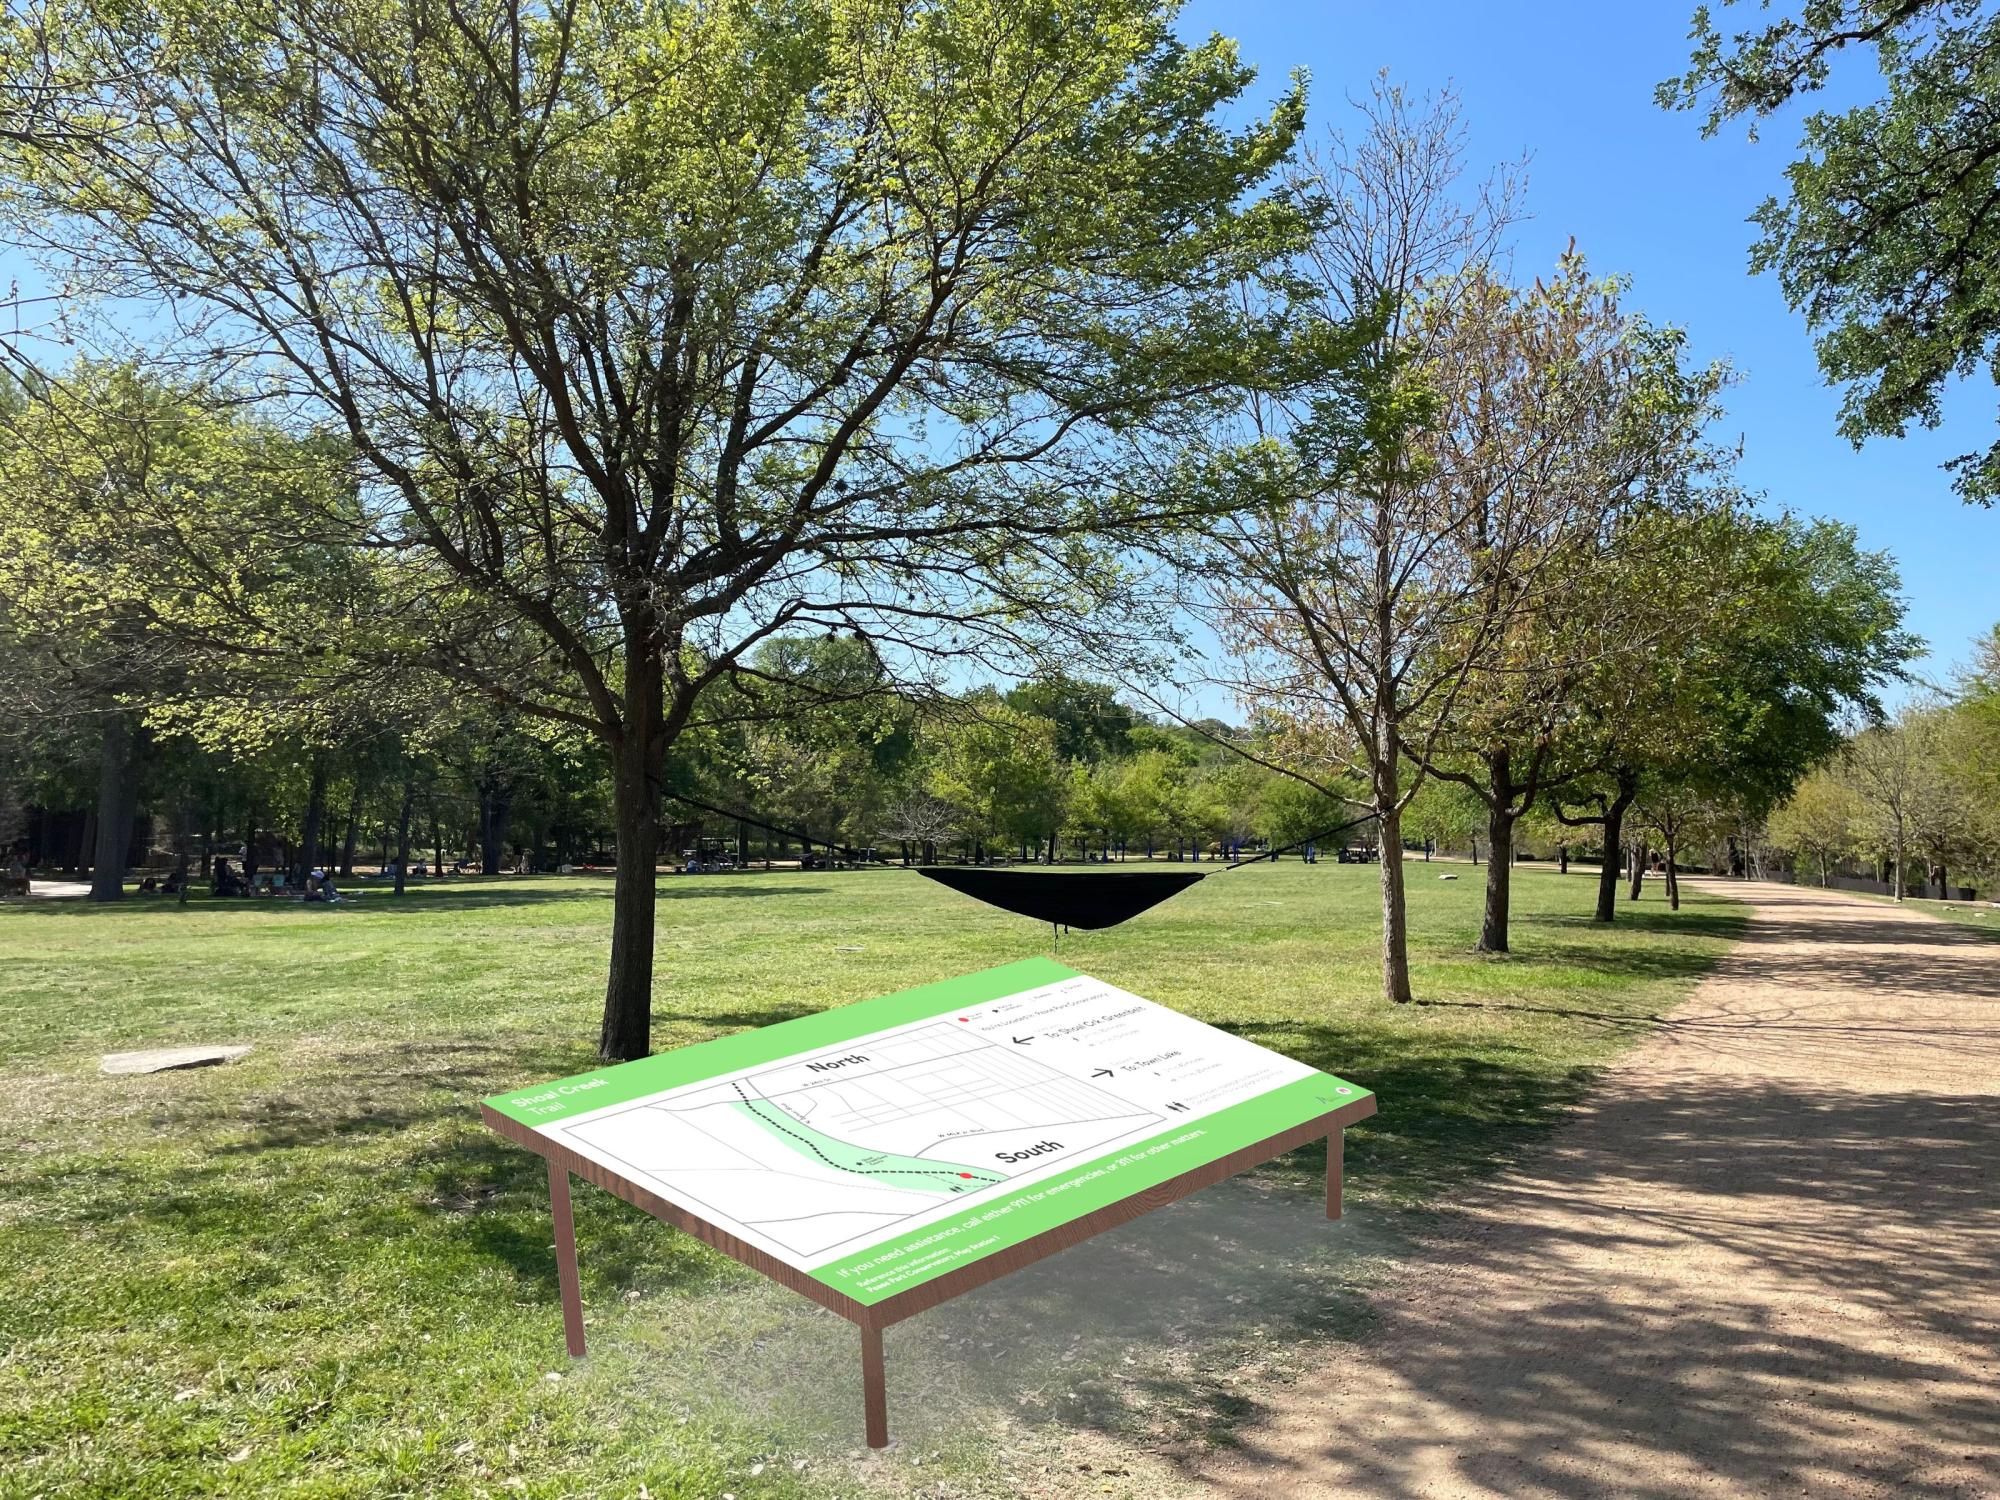 Park trail with hammock in trees in the background and a trail map mockup in the foreground